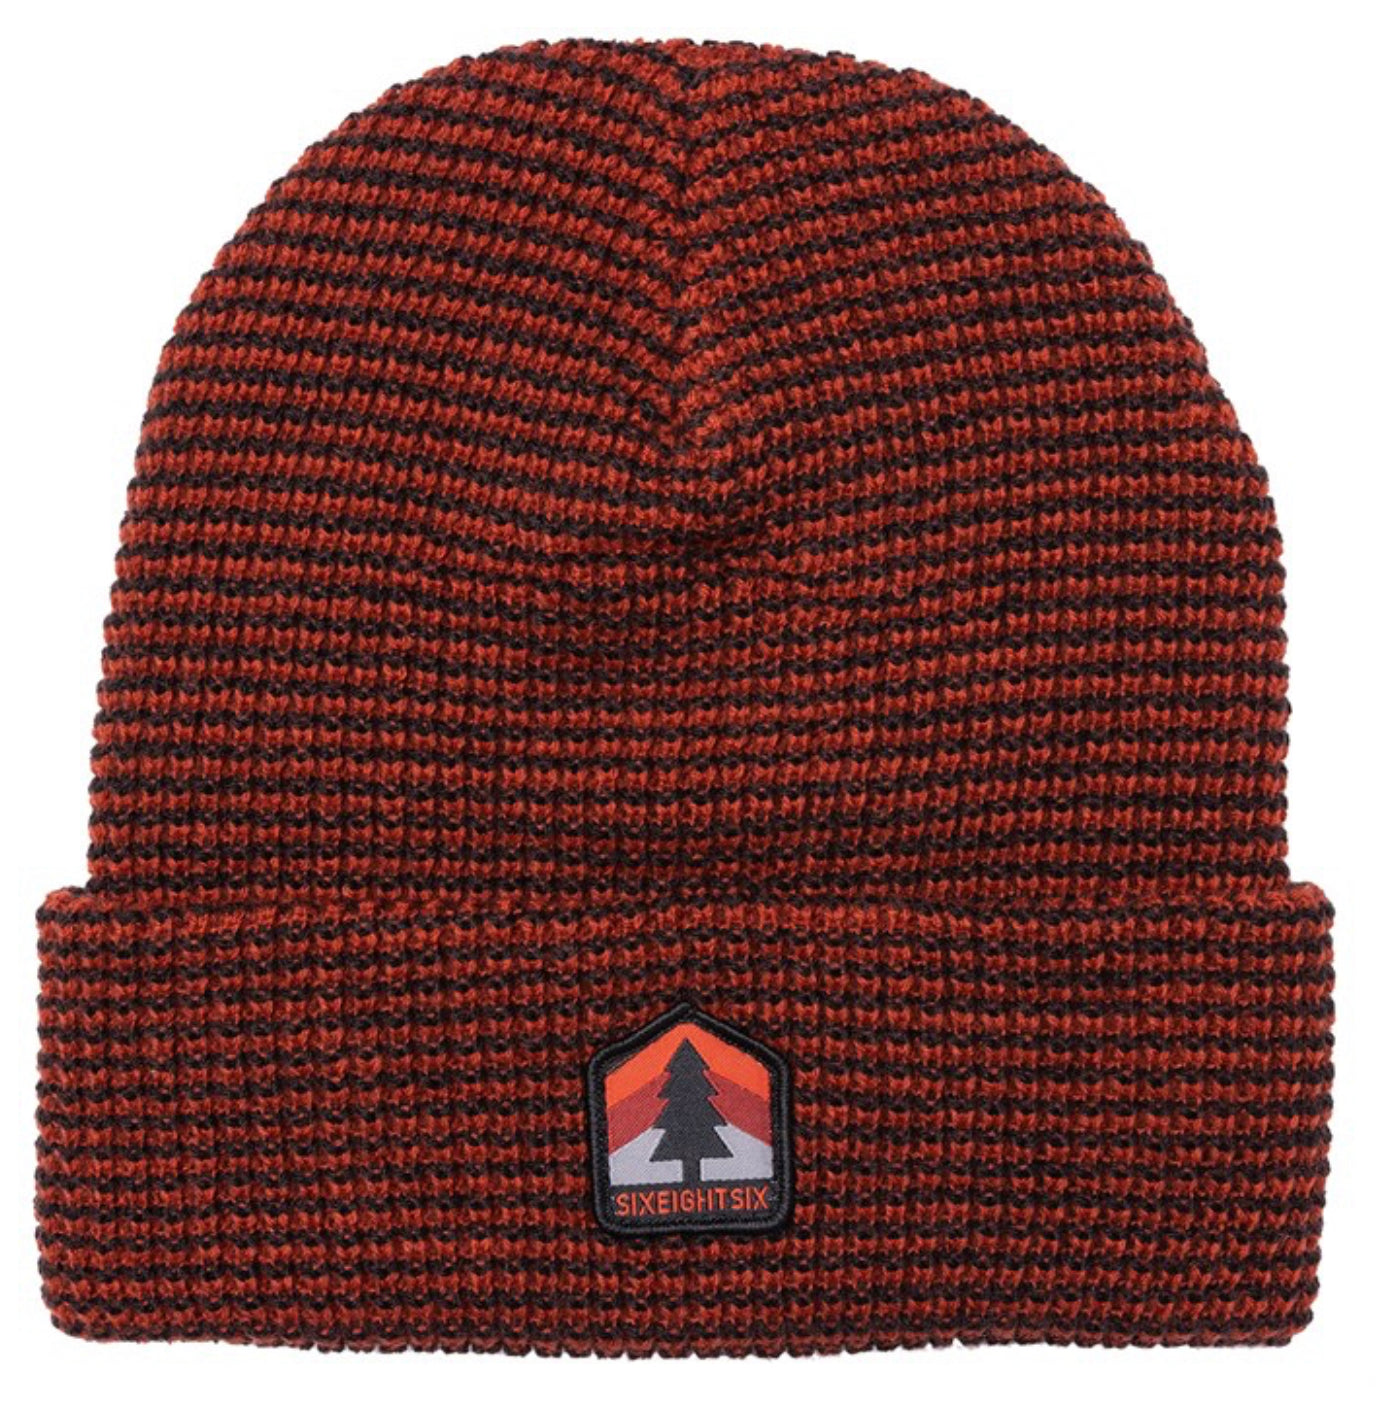 686 - Two Tone Thermal Beanie 3 Pack